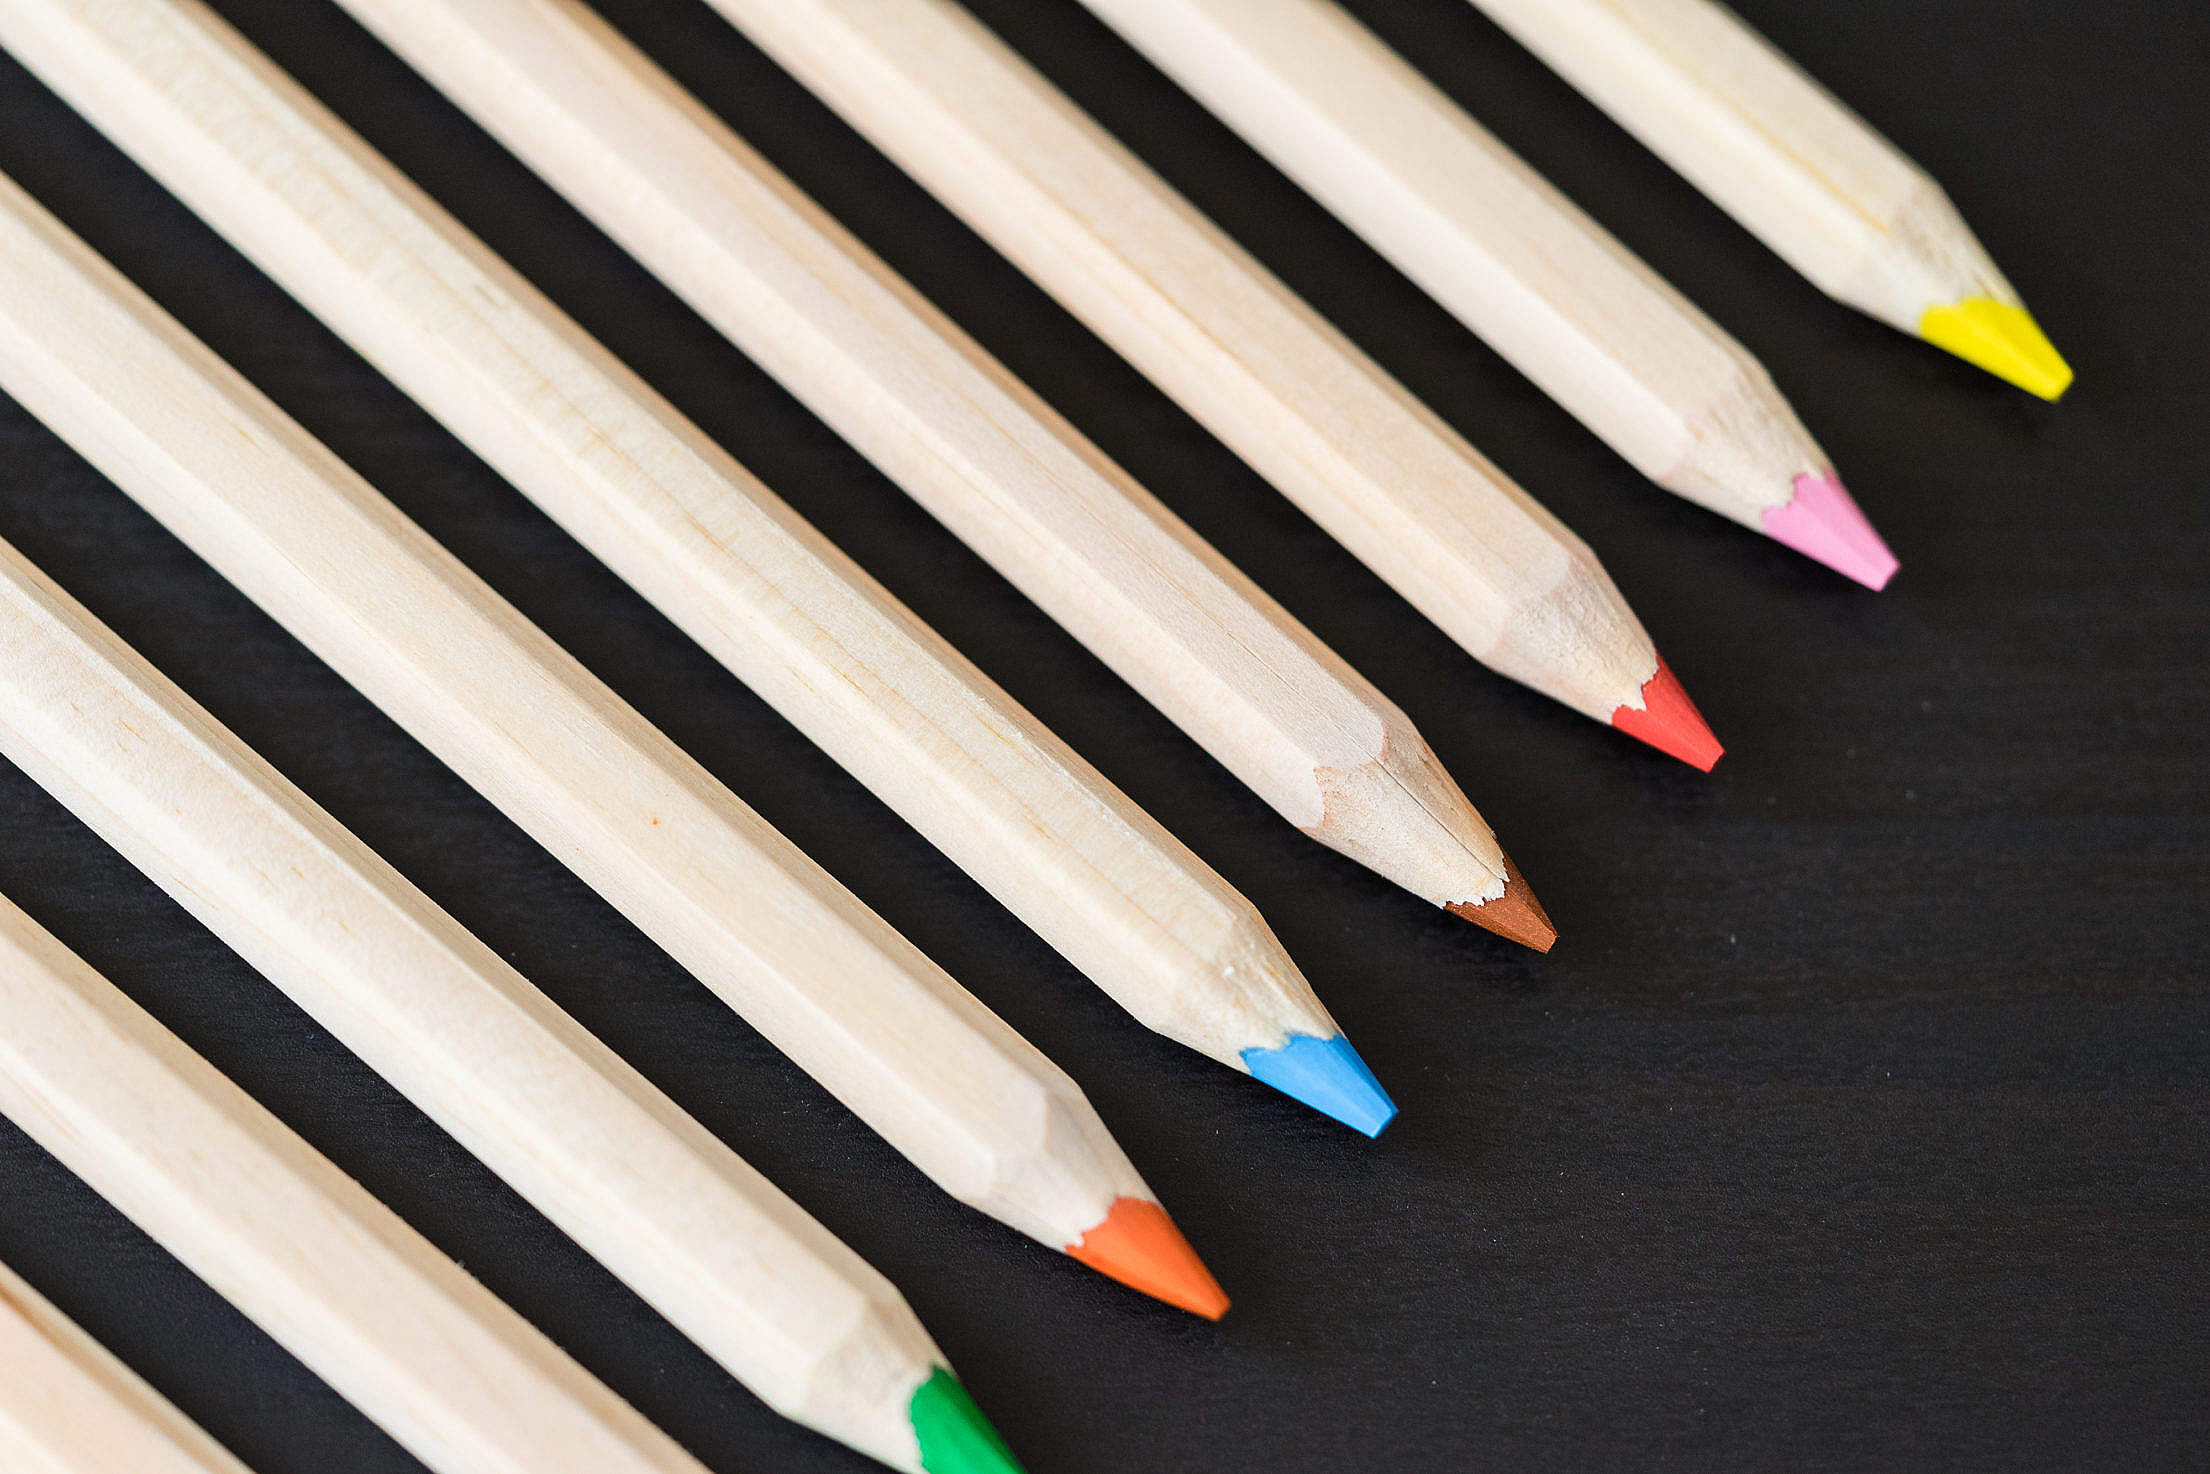 Long Colored Pencils in a Row on Black Desk Free Stock Photo